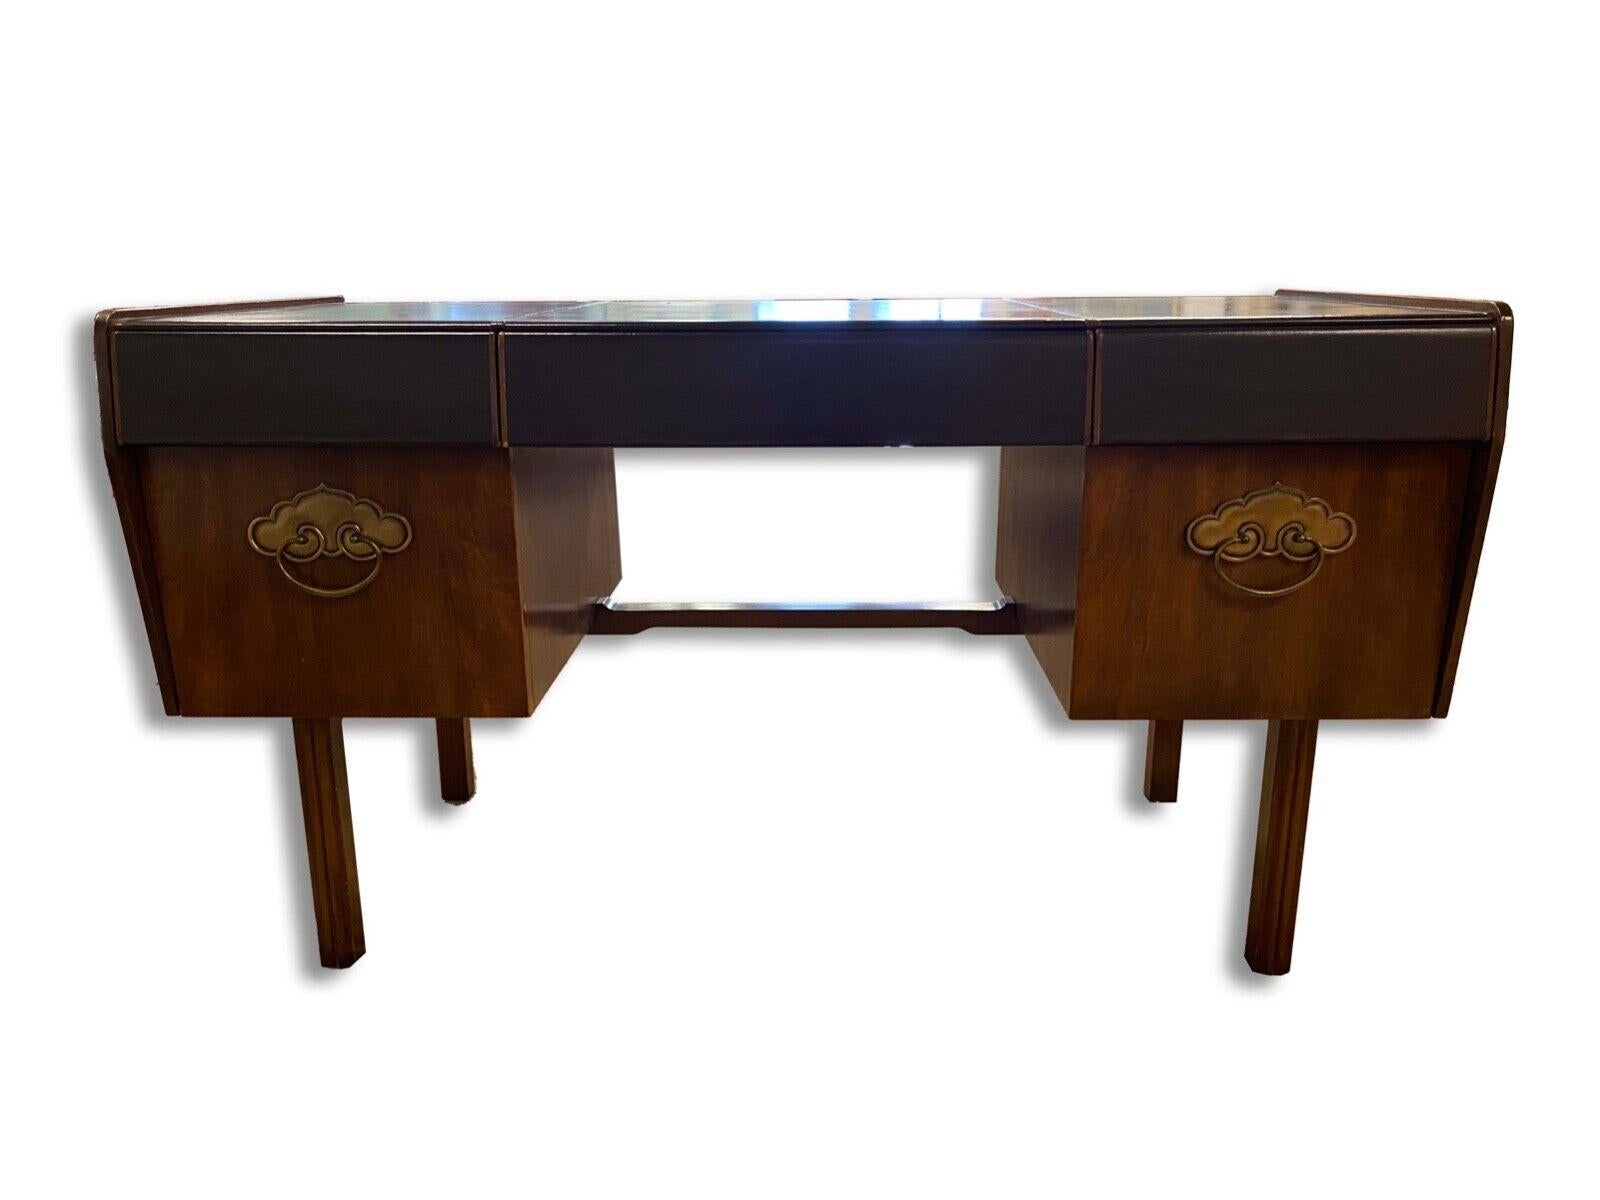 The Bert England for Widdicomb Leather Top Desk is a remarkable blend of style and functionality. Designed by renowned designer Bert England, this desk showcases exquisite craftsmanship and attention to detail. The desk features a luxurious leather